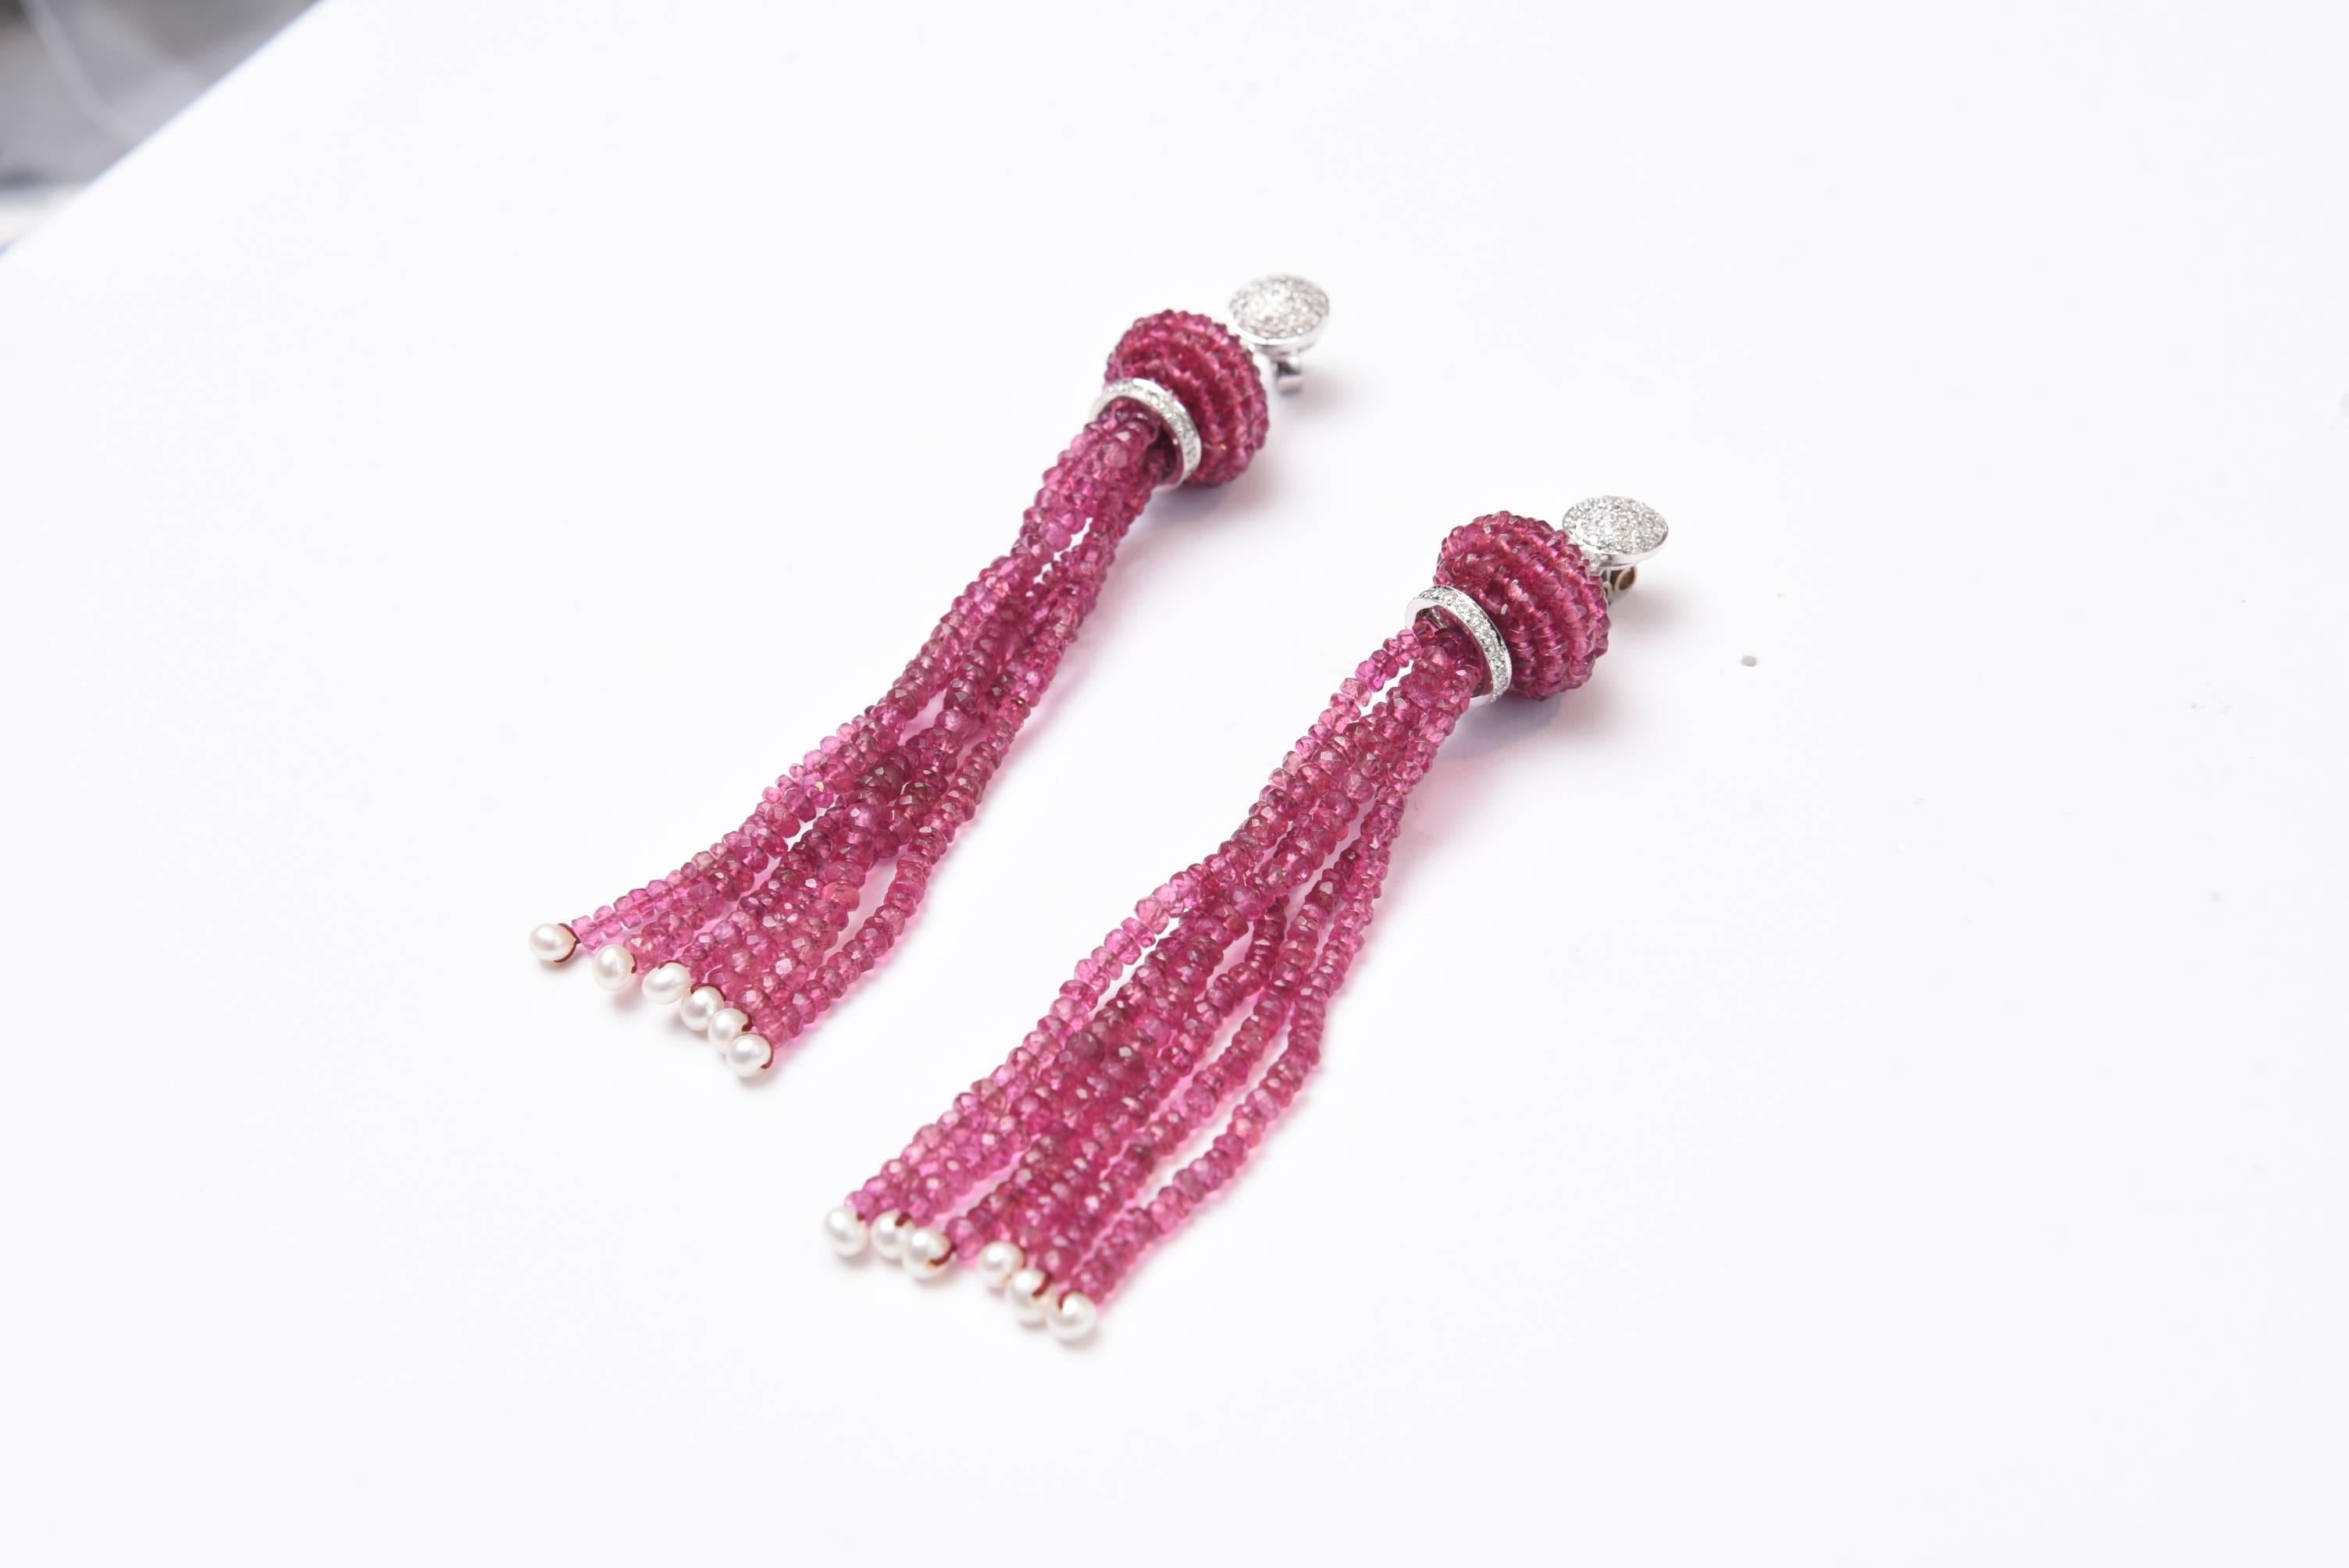 Pair of faceted pink tourmalines with seed pearls at the bottom.  18K white gold and pave` set diamond rondells as well as the top stud which has a 3/8ths inch diameter  Great look and movement.  For pierced ears.

The fine jewelry collection is